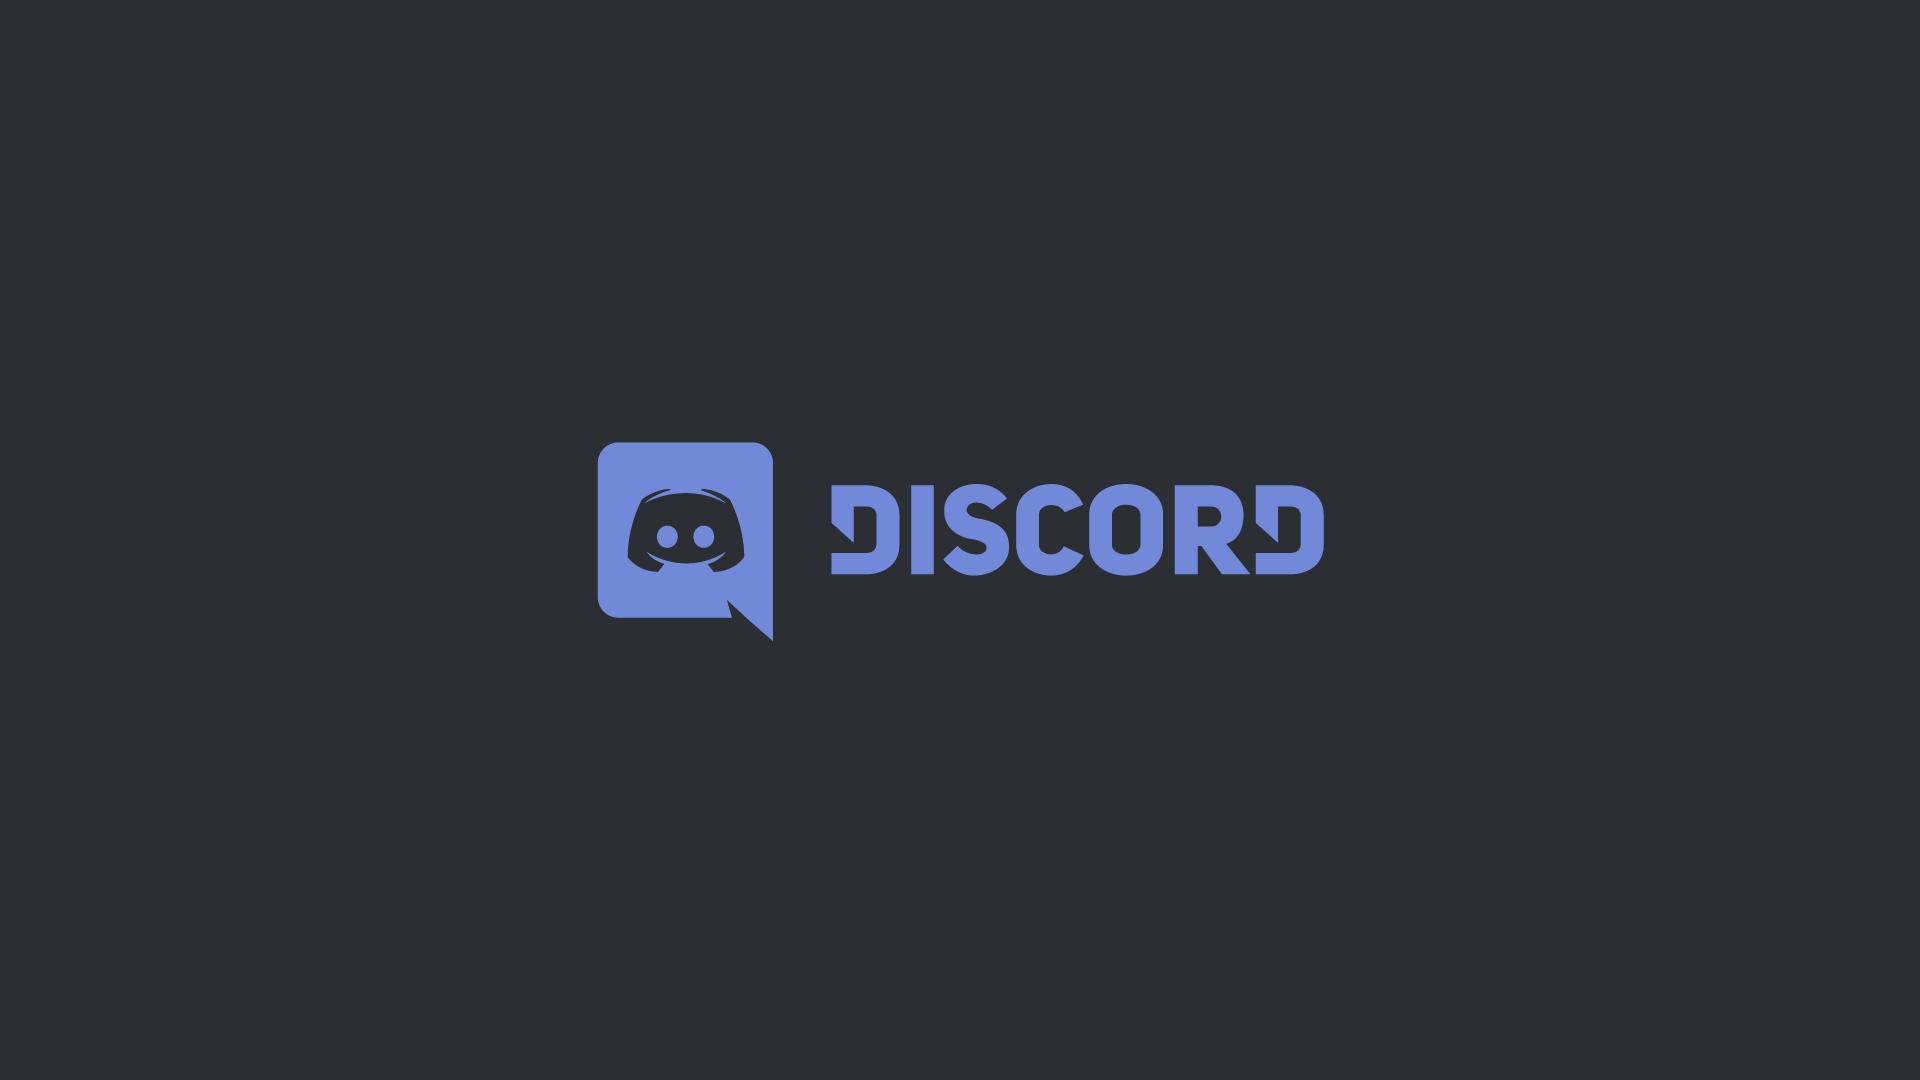 I made some Discord wallpapers for you! Leave requests for more in